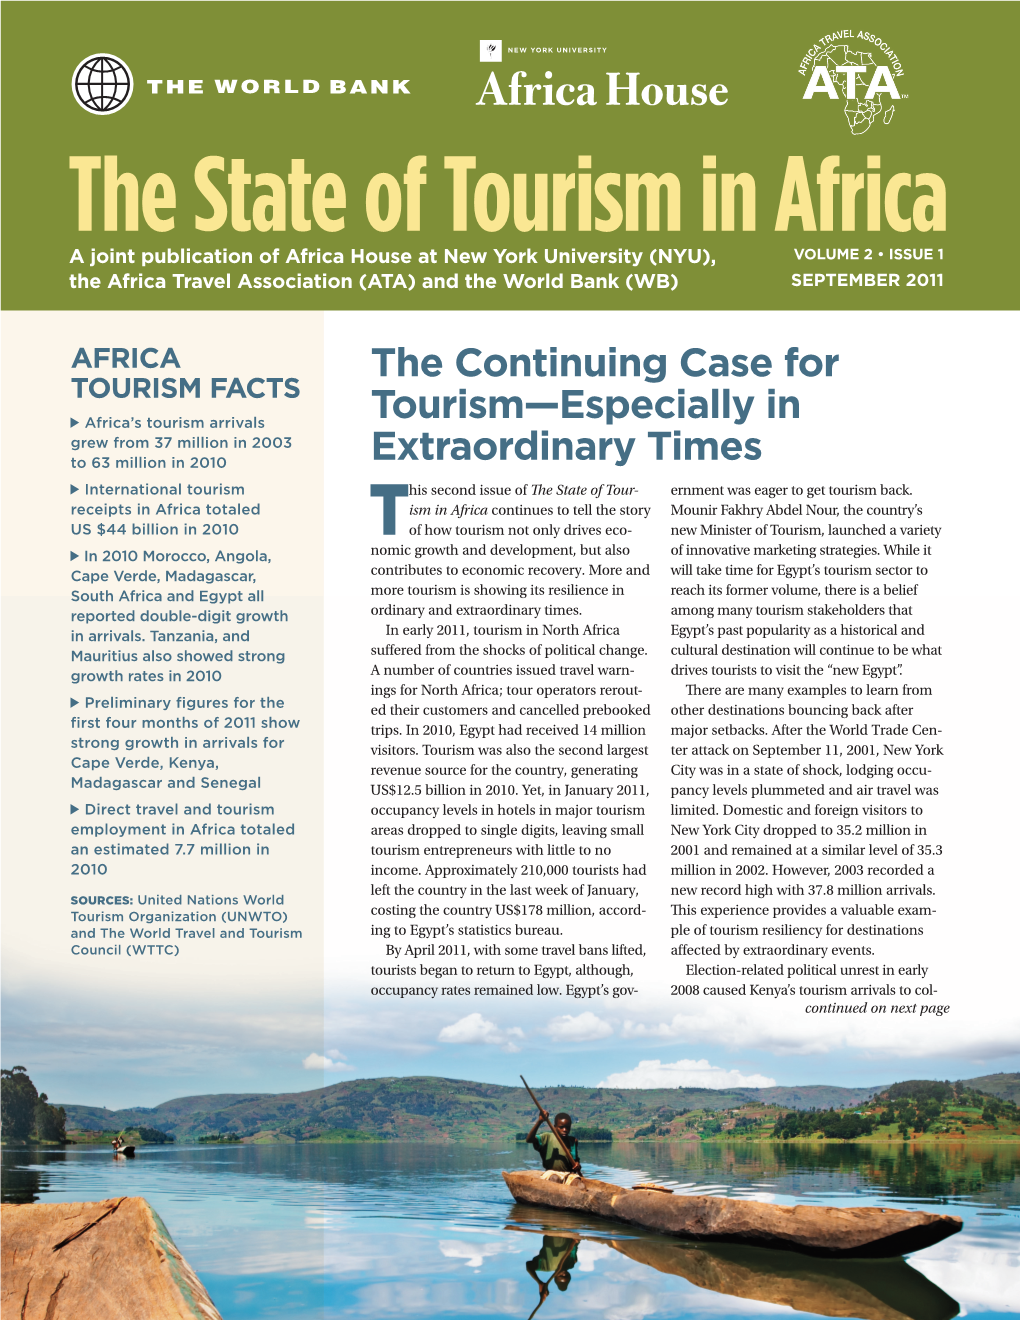 history of tourism in africa